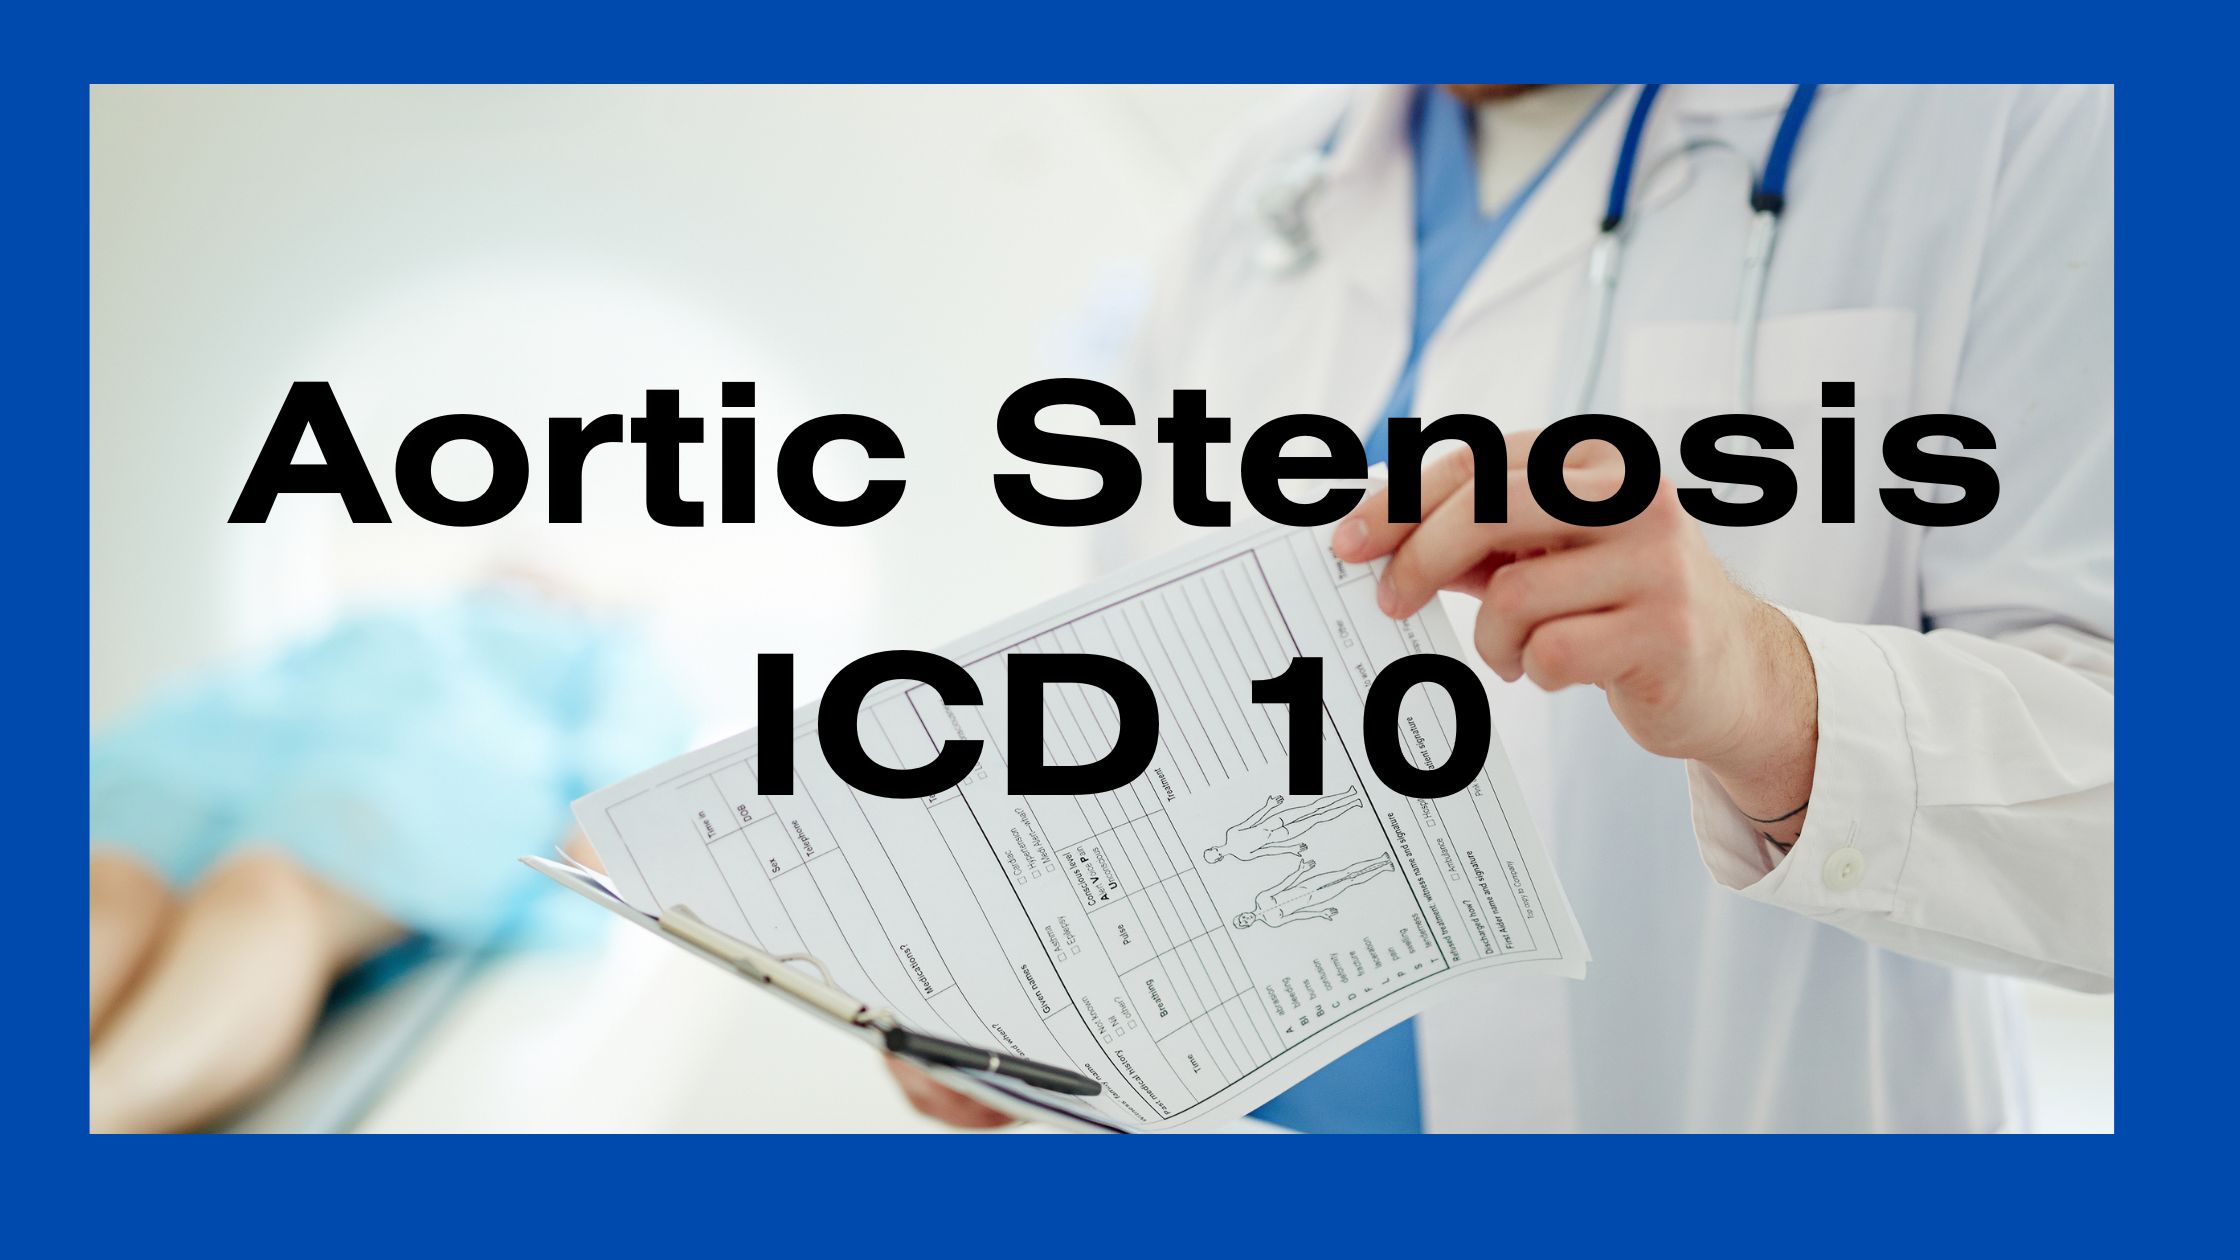 Aortic Stenosis ICD 10 code